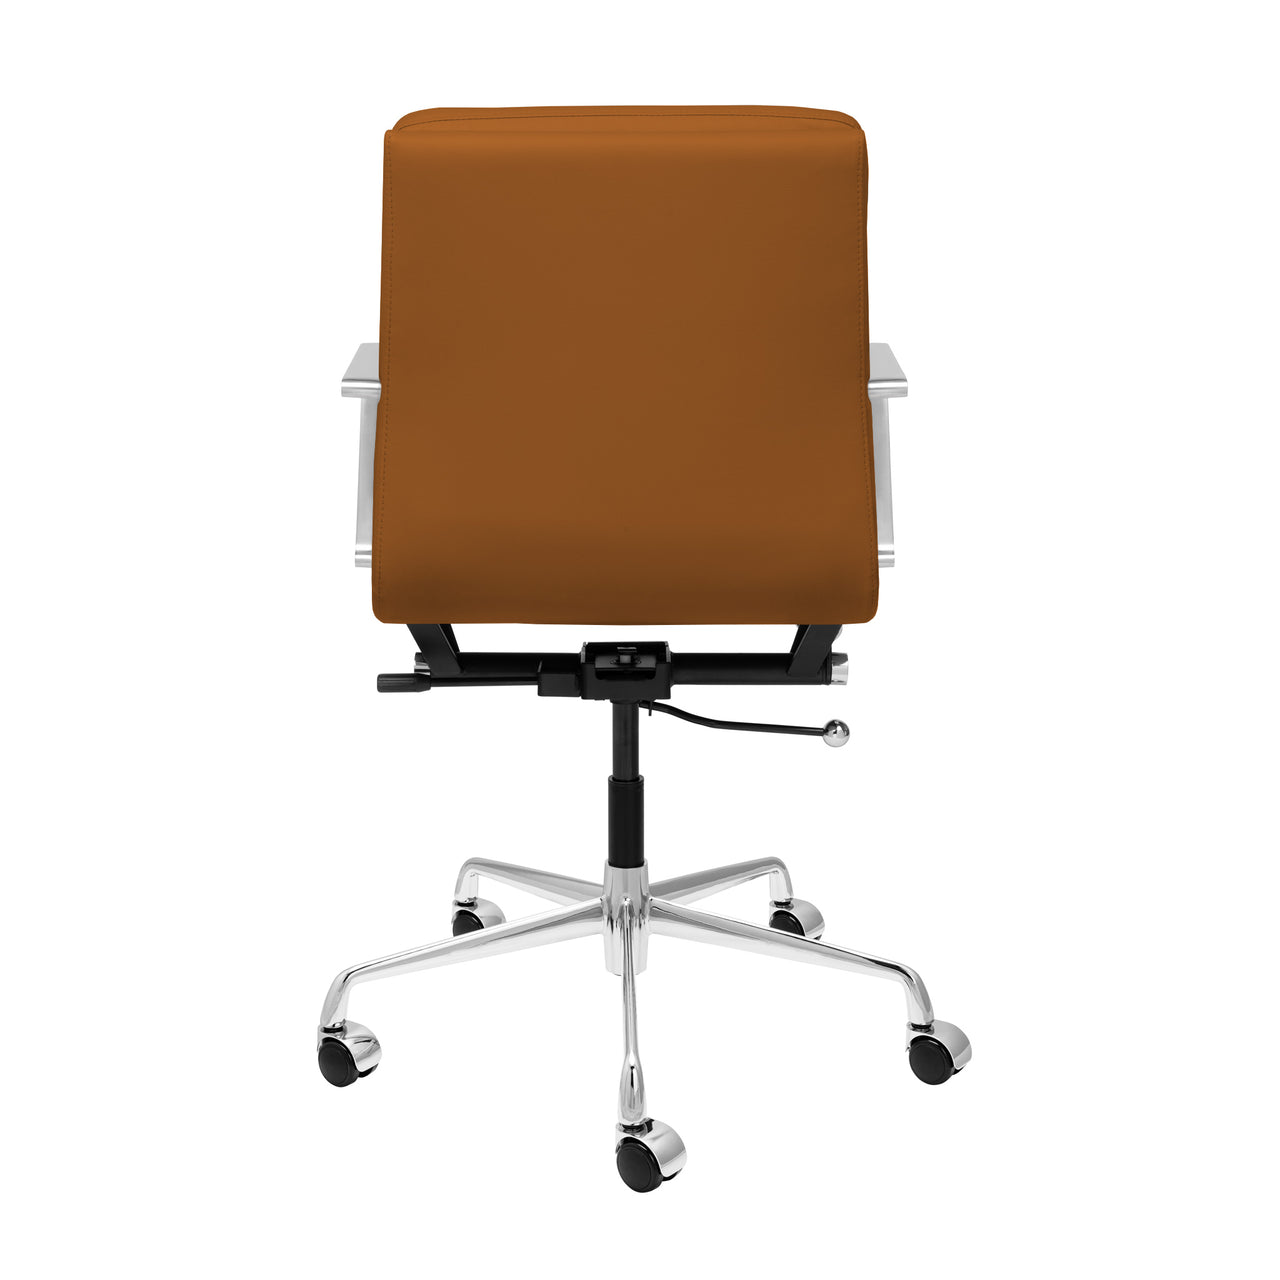 SOHO II Padded Management Chair (Brown)